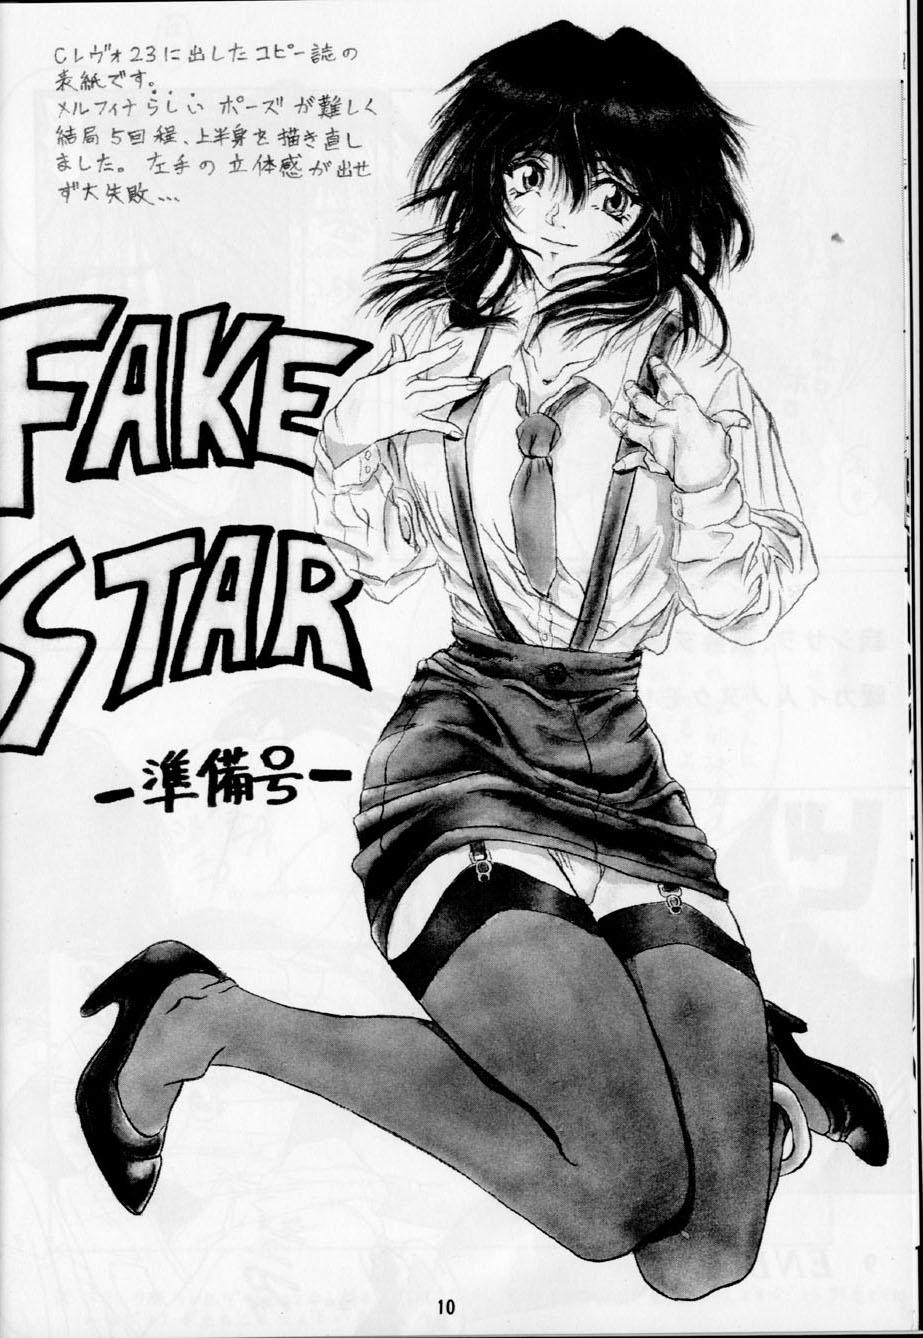 Exotic Fake Star - Outlaw star Spycam - Page 9